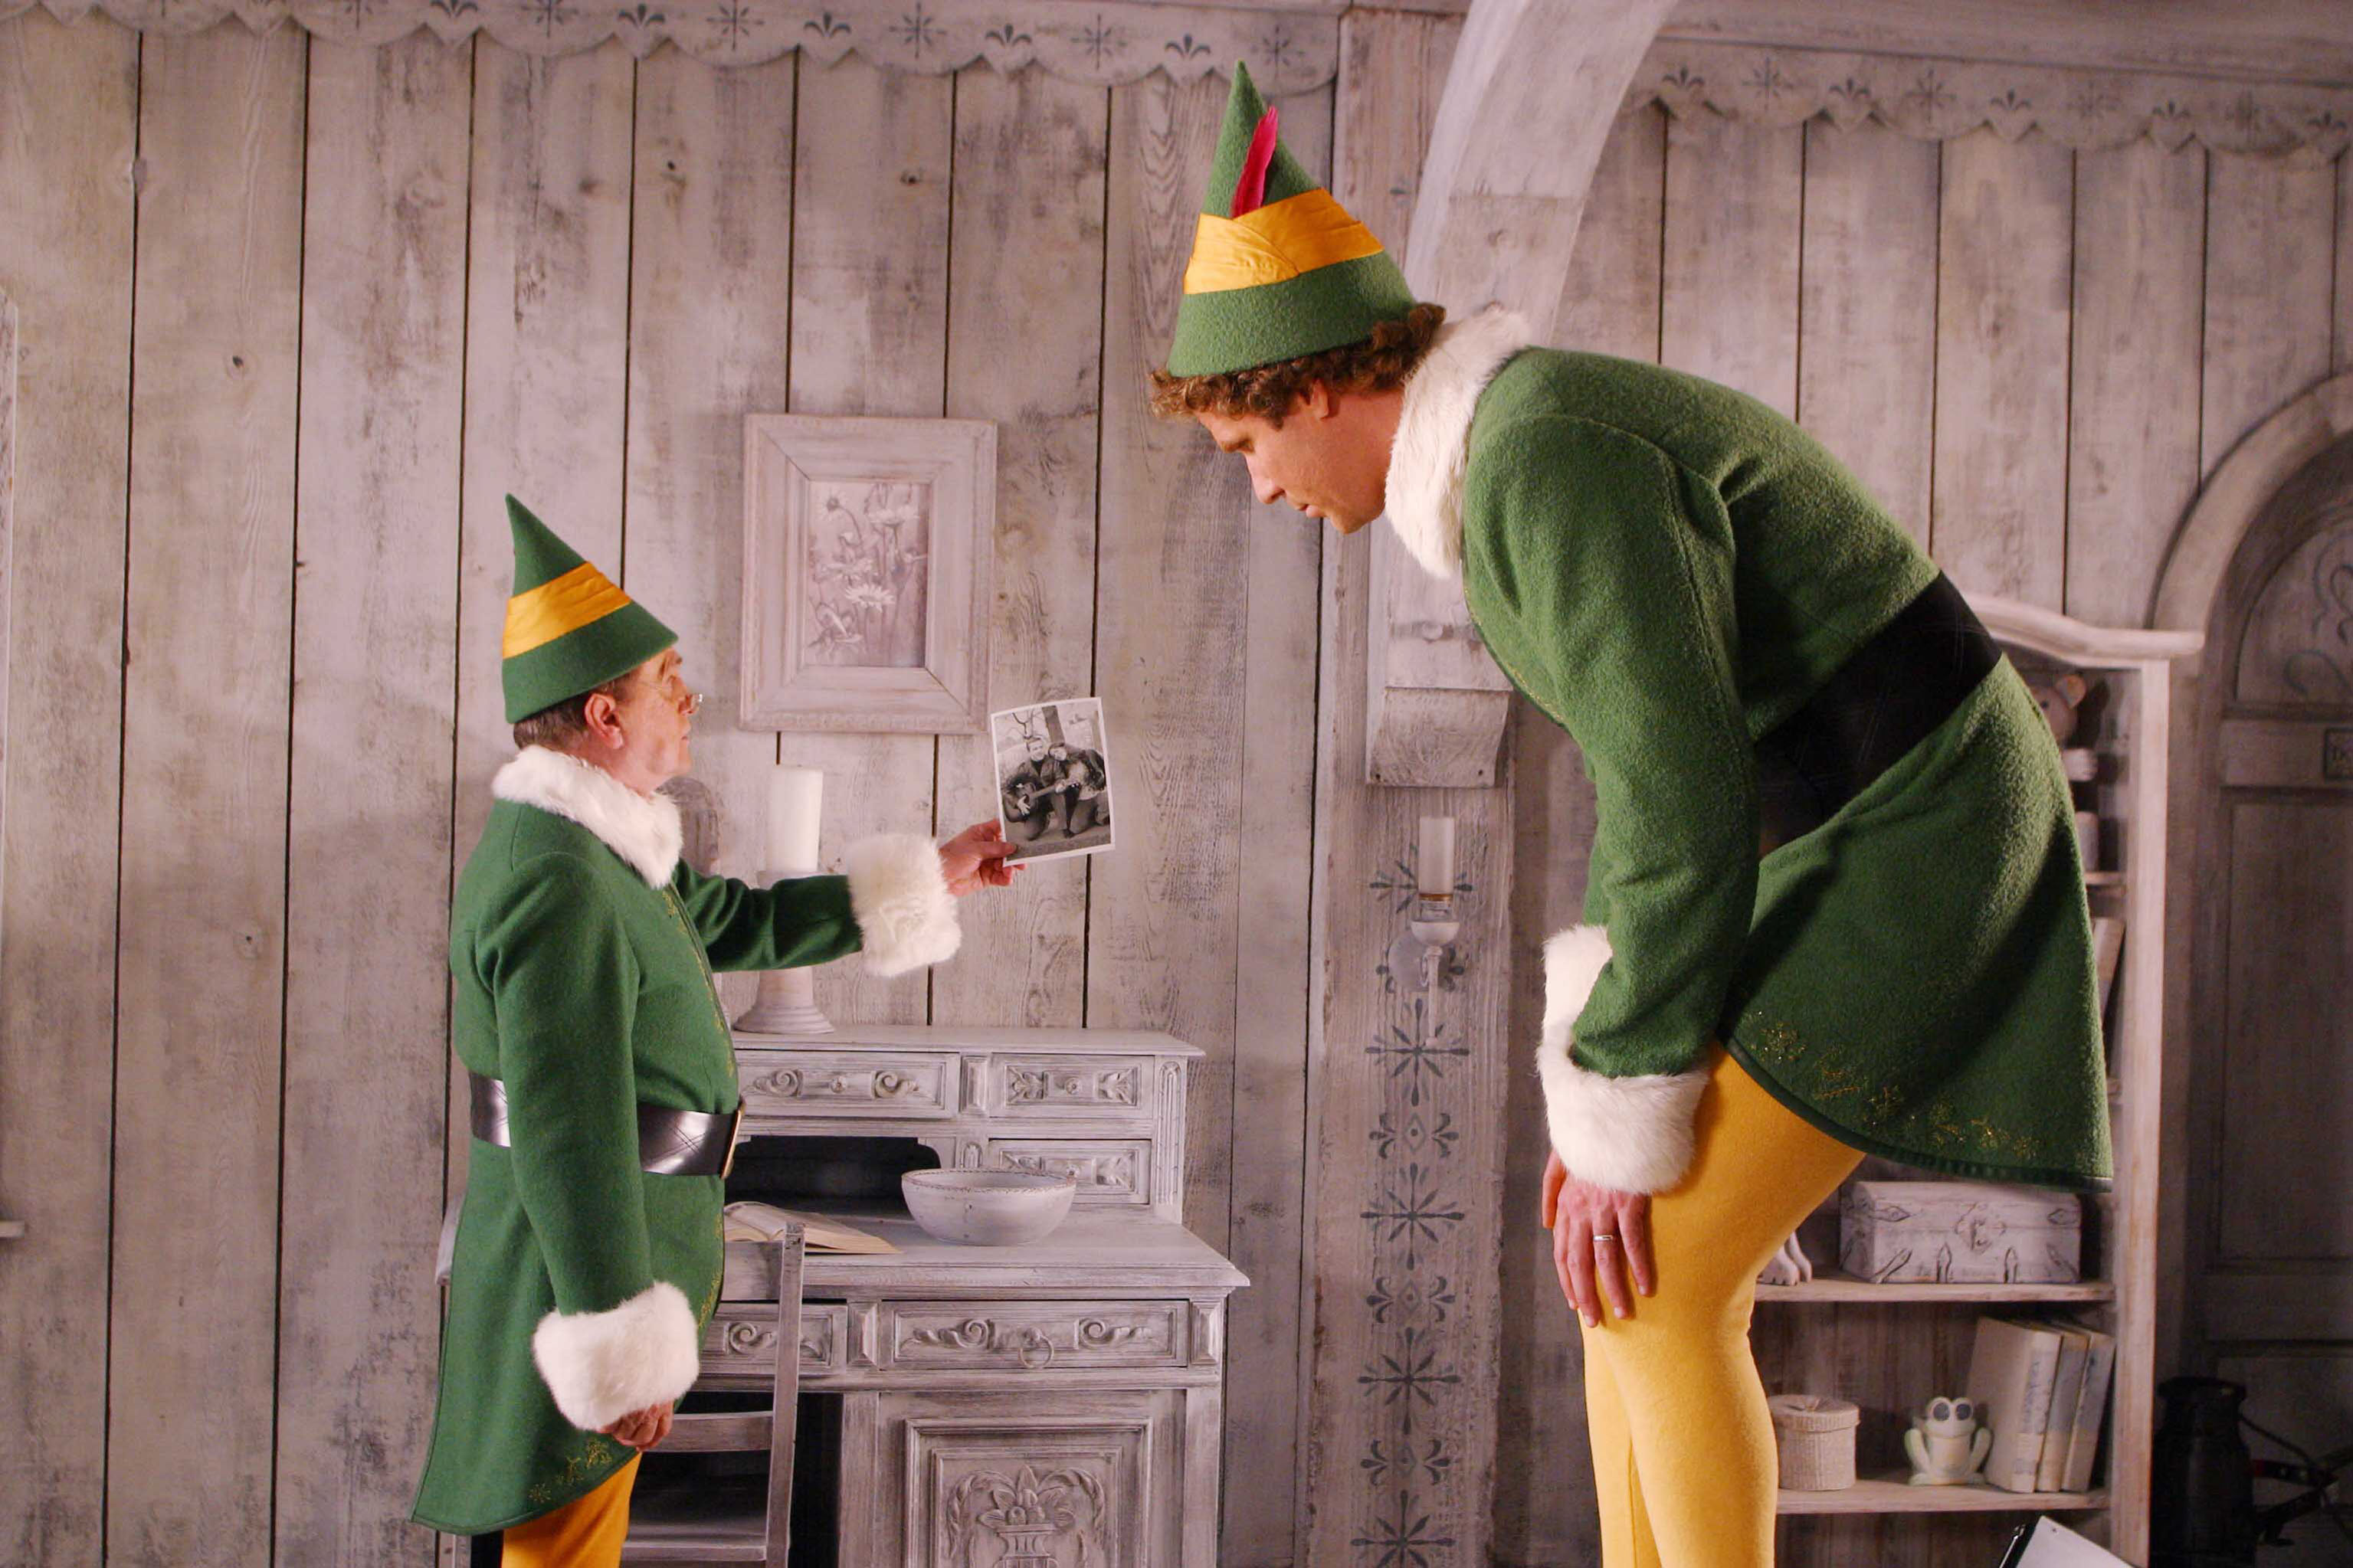 Newhart famously played Papa Elf in the popular Christmas film Elf, starring Will Ferrell